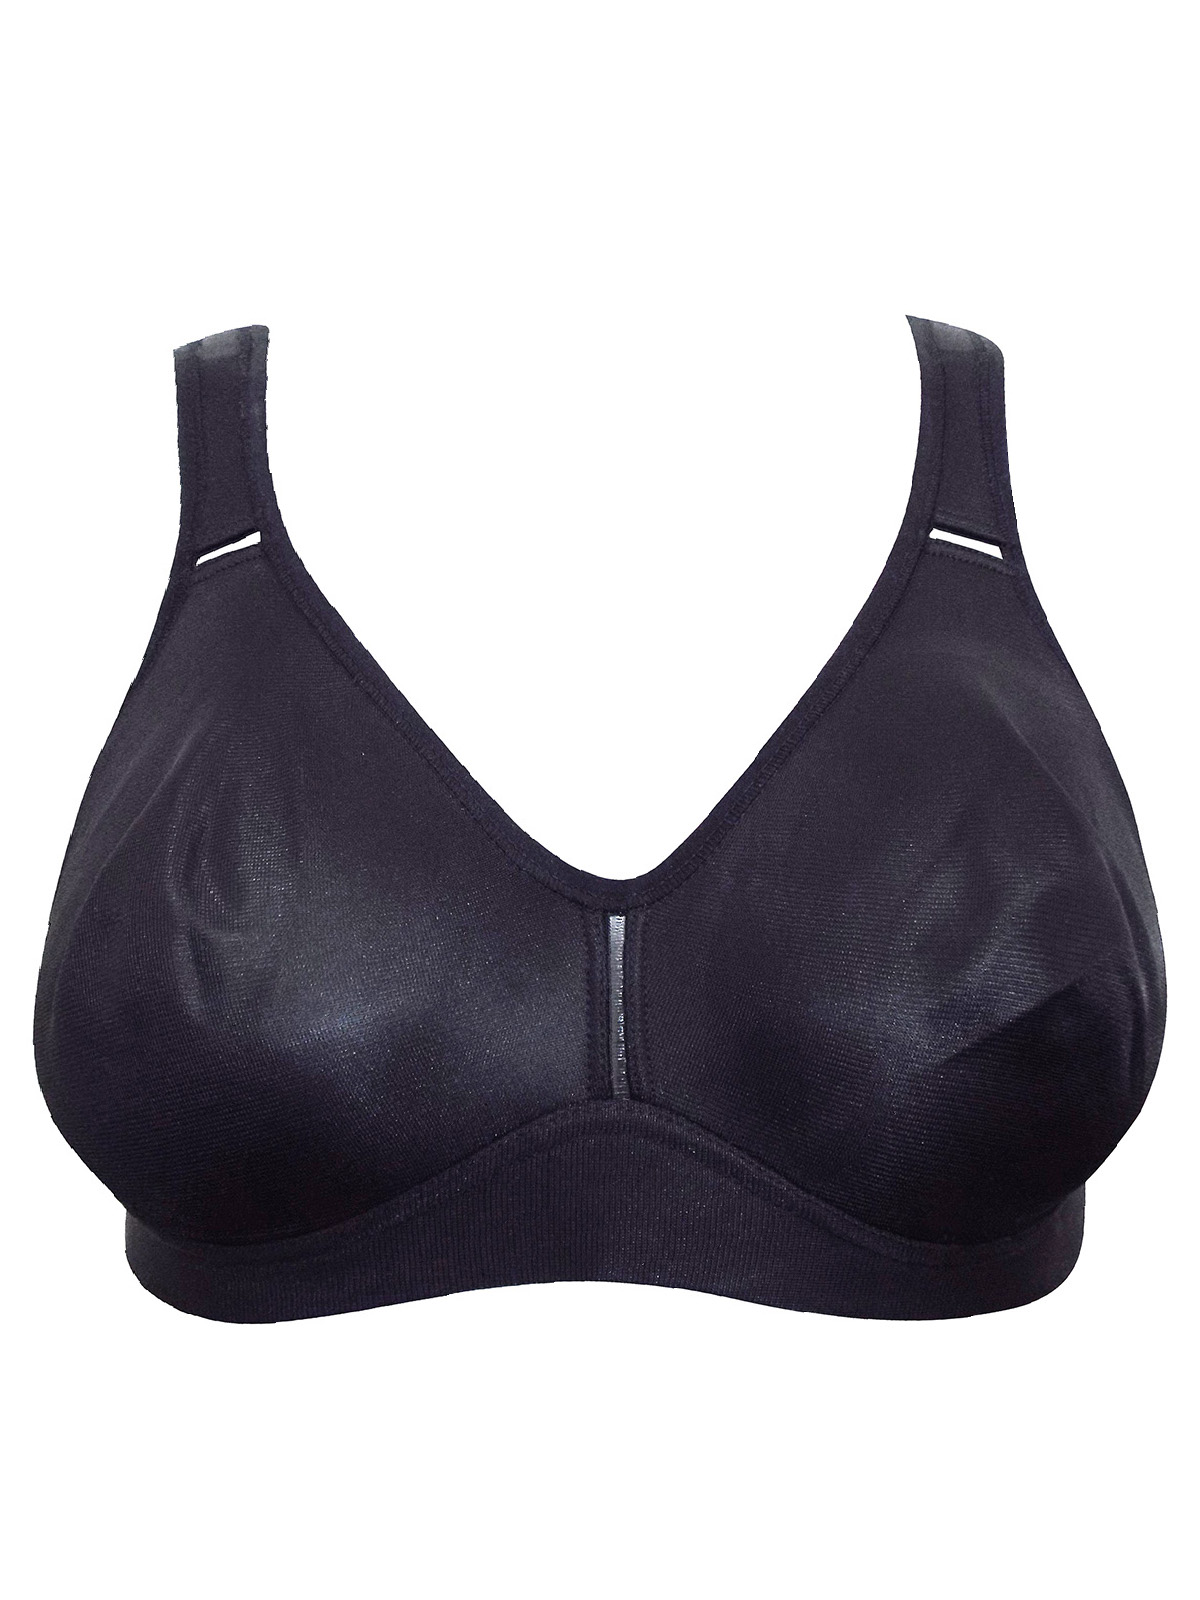 Trofe - - BLACK TOVE Non-Wired Soft Full Cup Bra - Size 34 to 44 (B-C-D-DD)